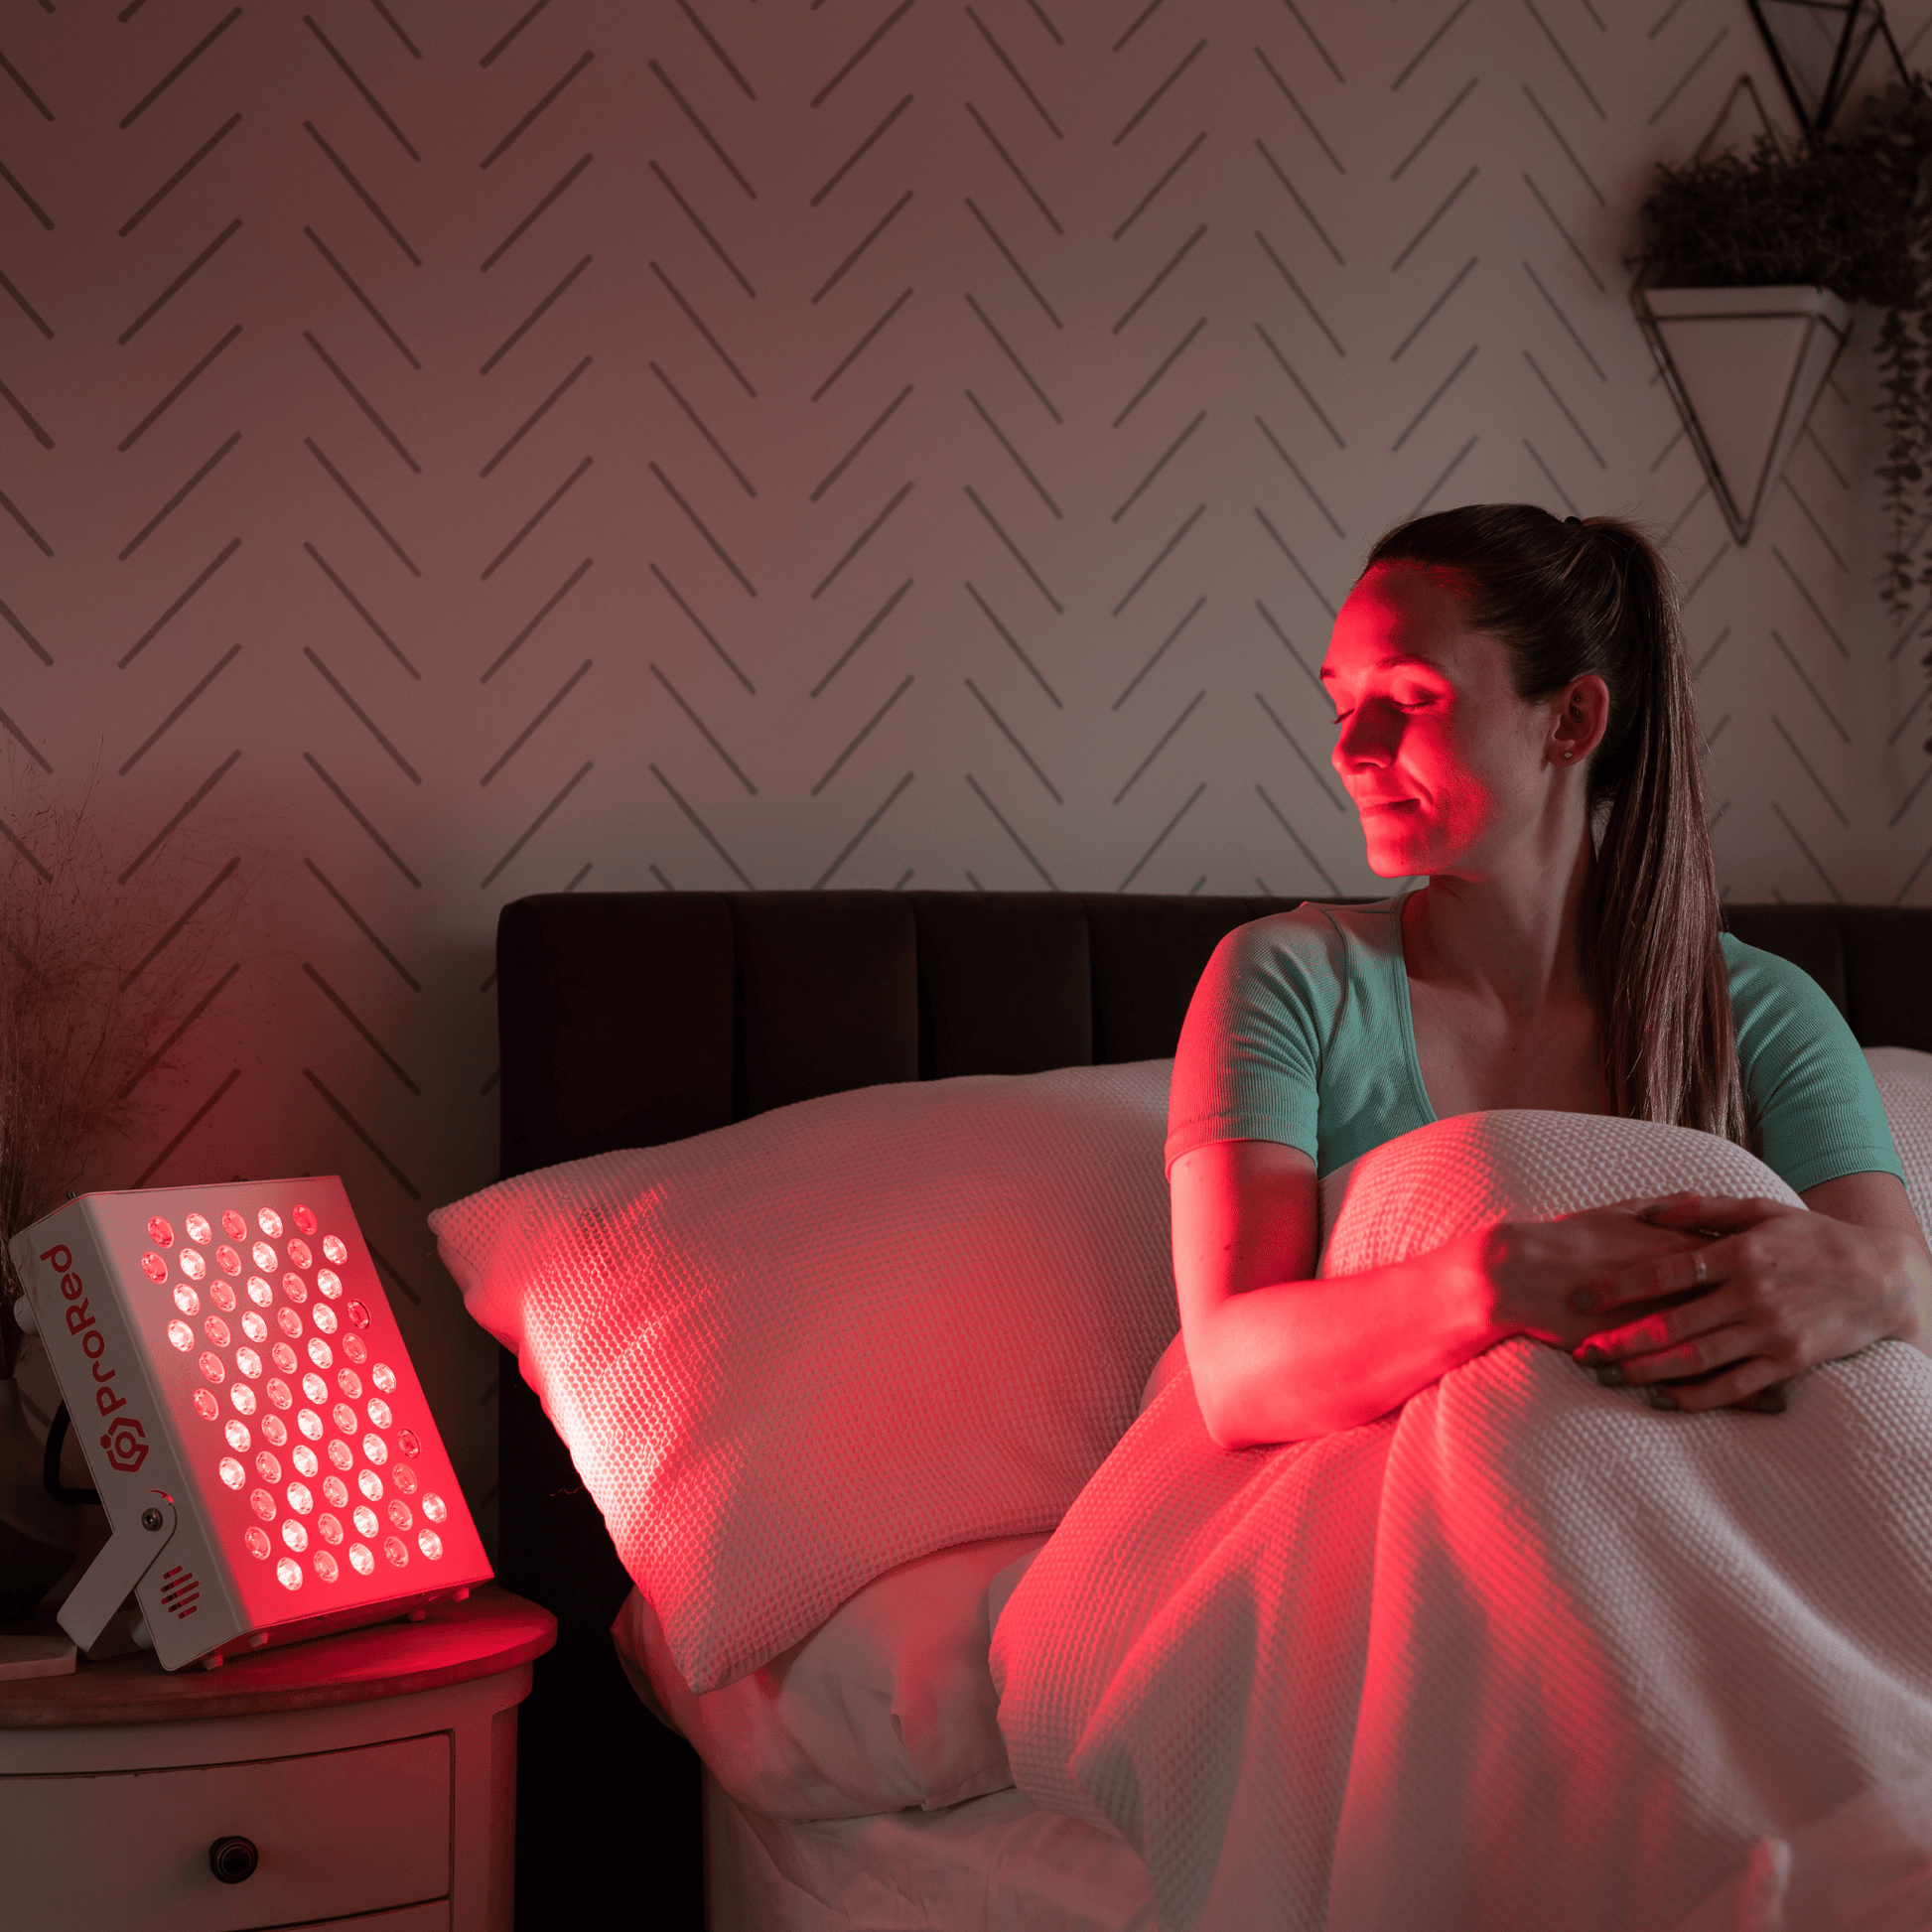 Girl sat in bed doing red light therapy with targeted device